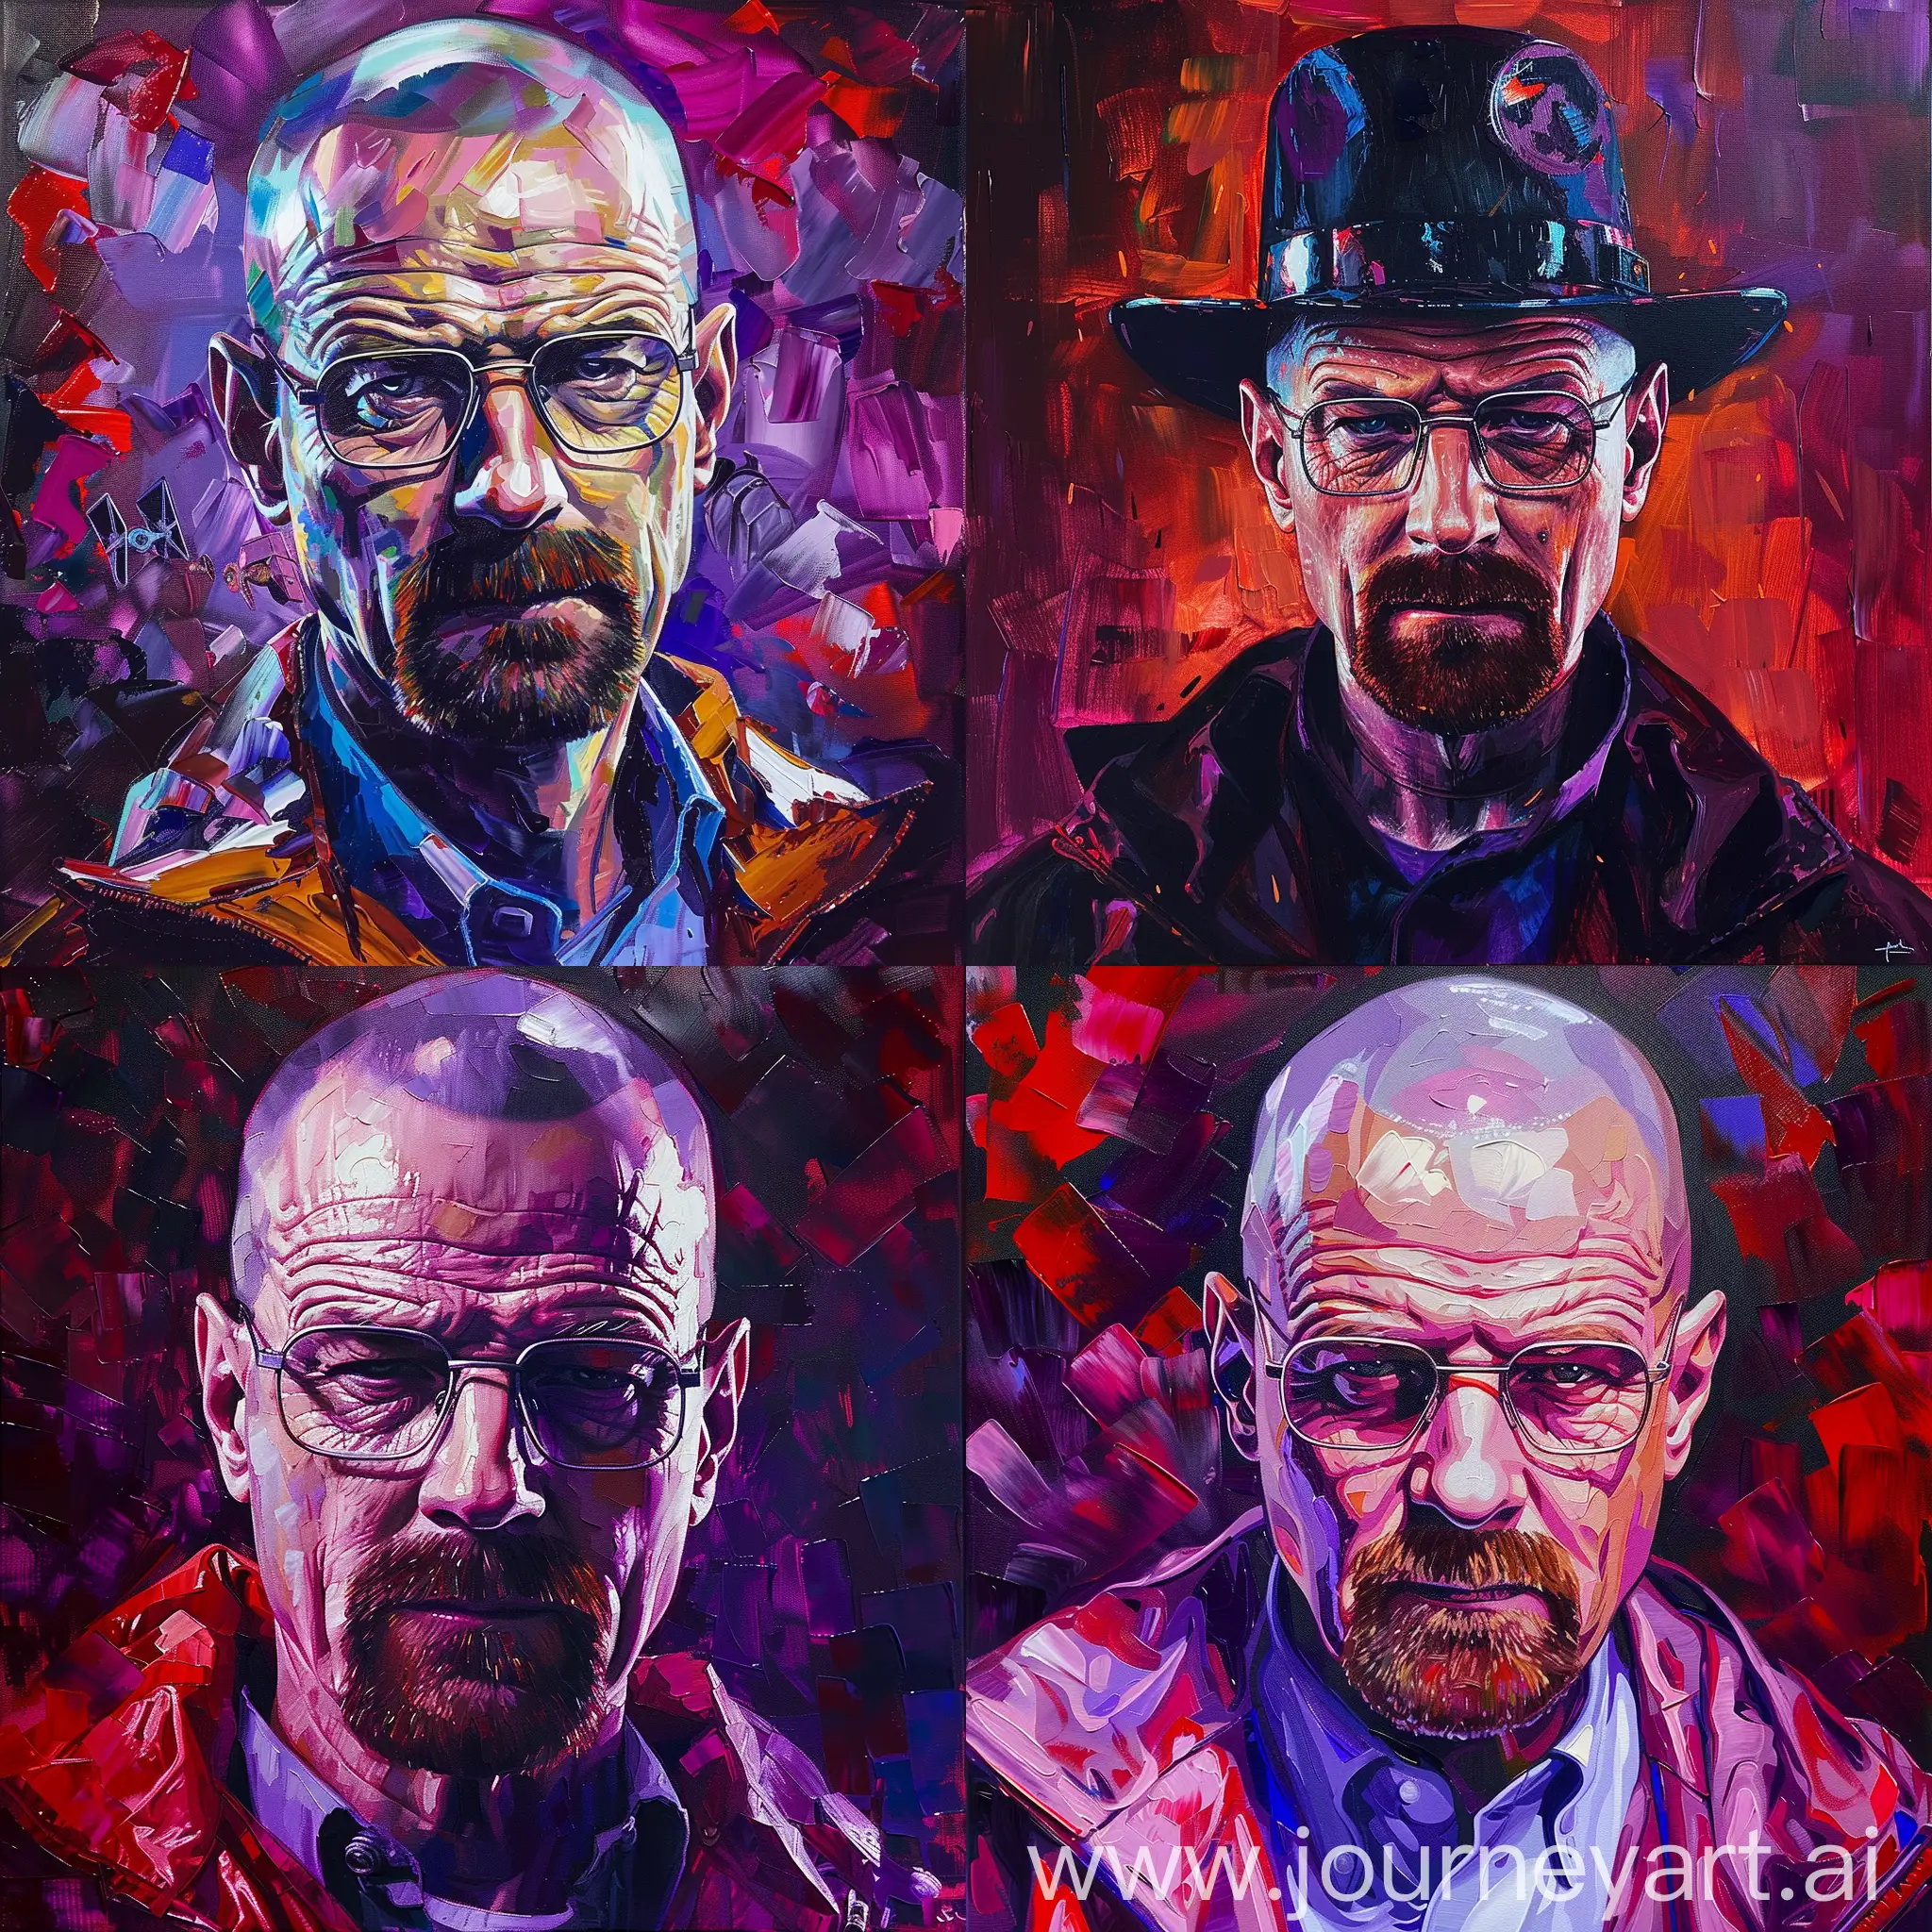 Heisenberg-of-Breaking-Bad-in-Star-Wars-Style-Oil-Painting-with-Moody-Purple-and-Red-Palette